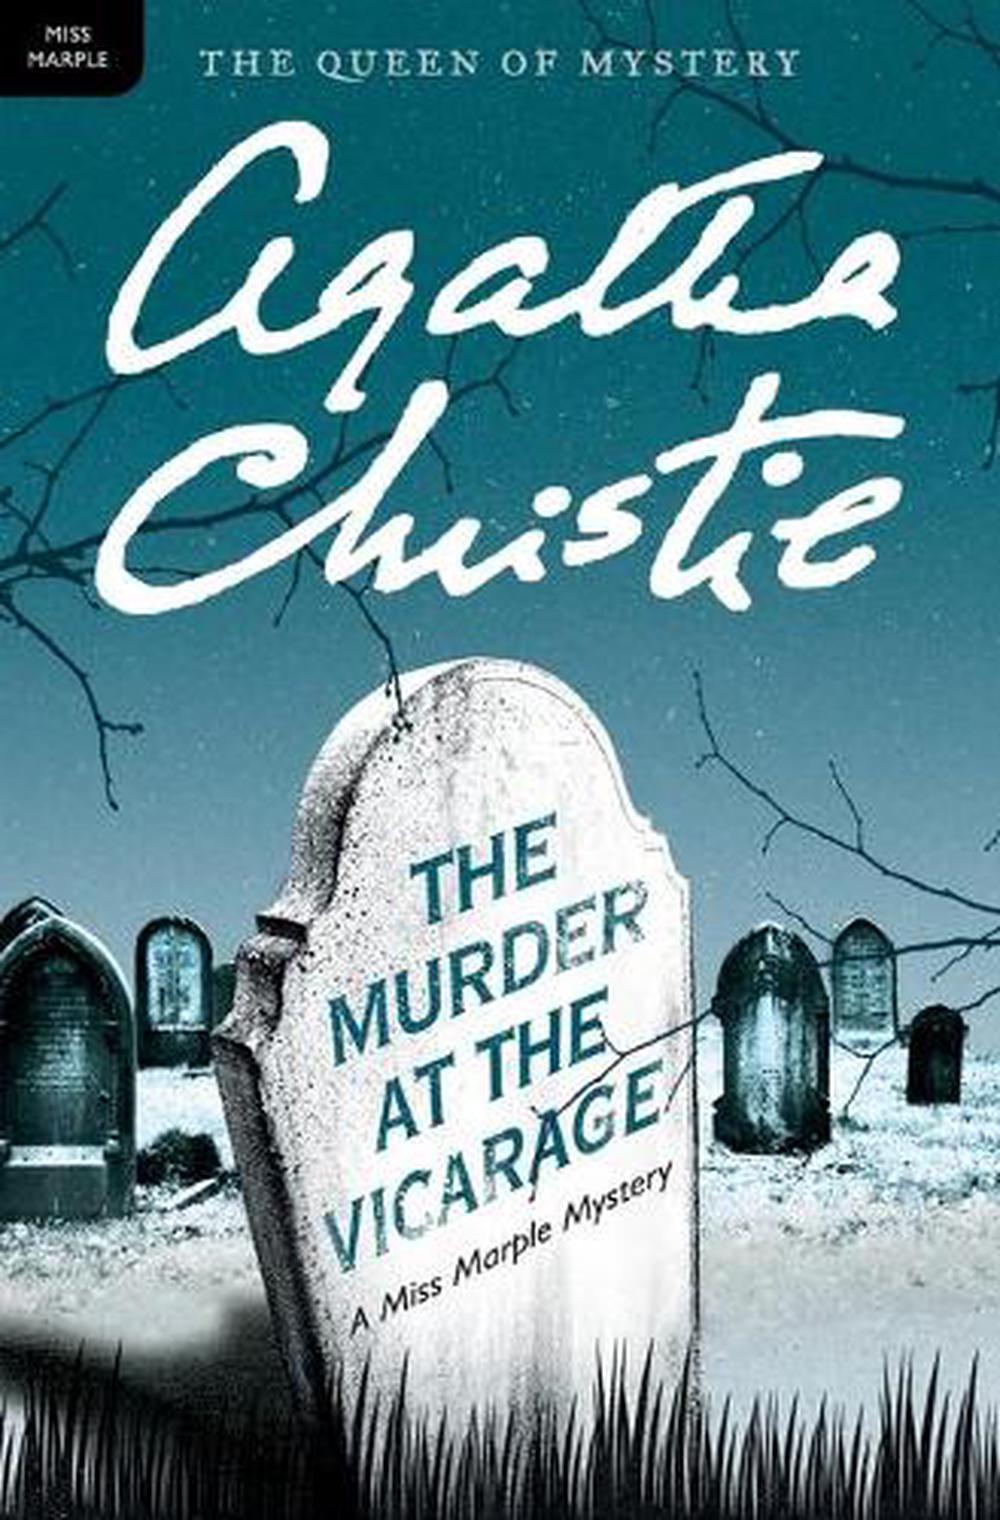 the murder at the vicarage by agatha christie